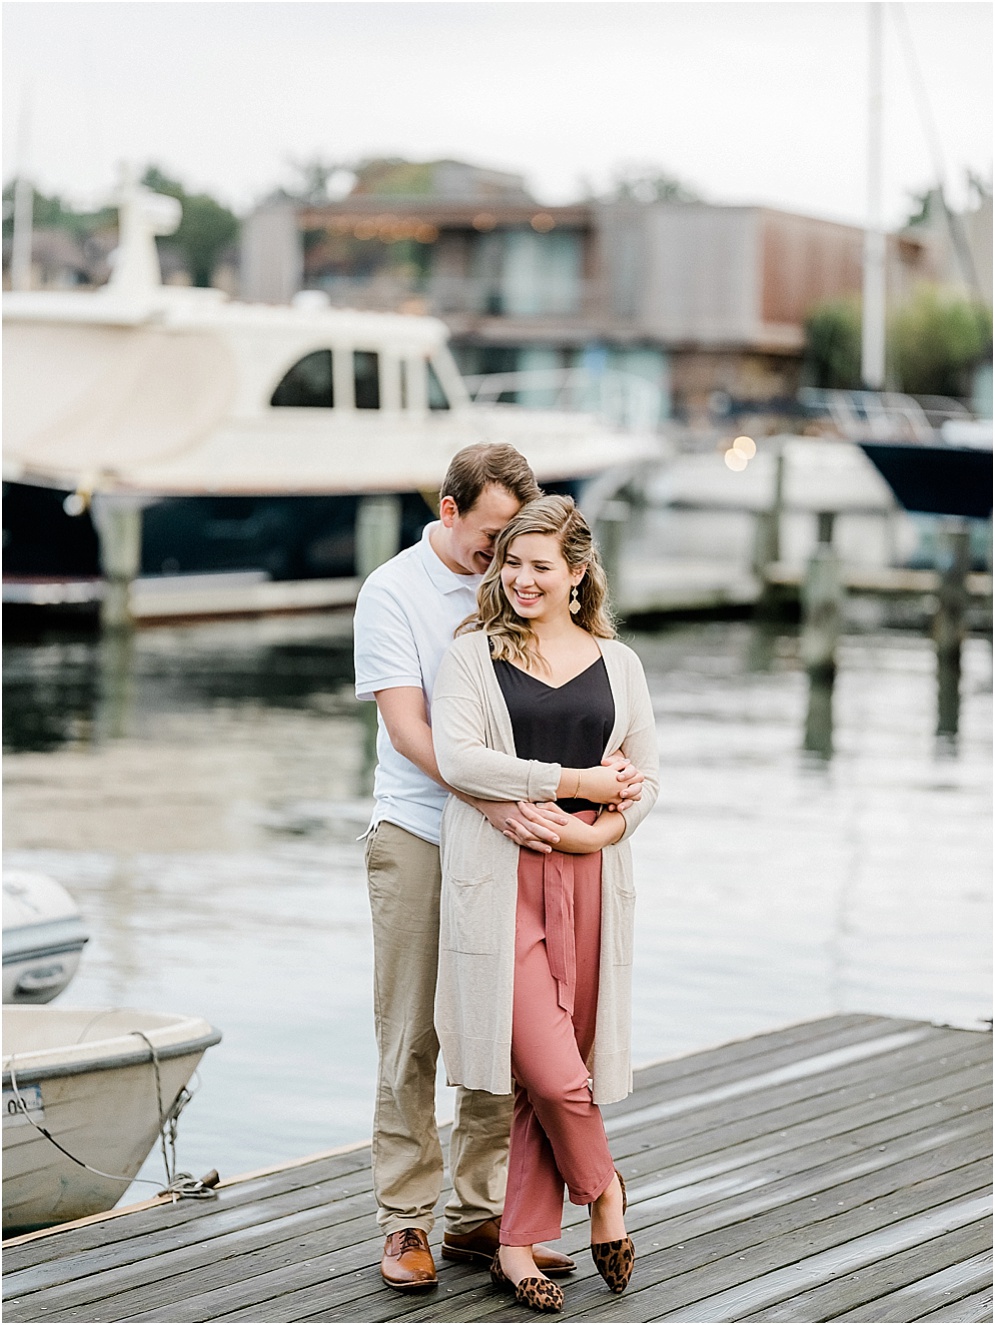 A playful and colorful downtown Annapolis photo session.